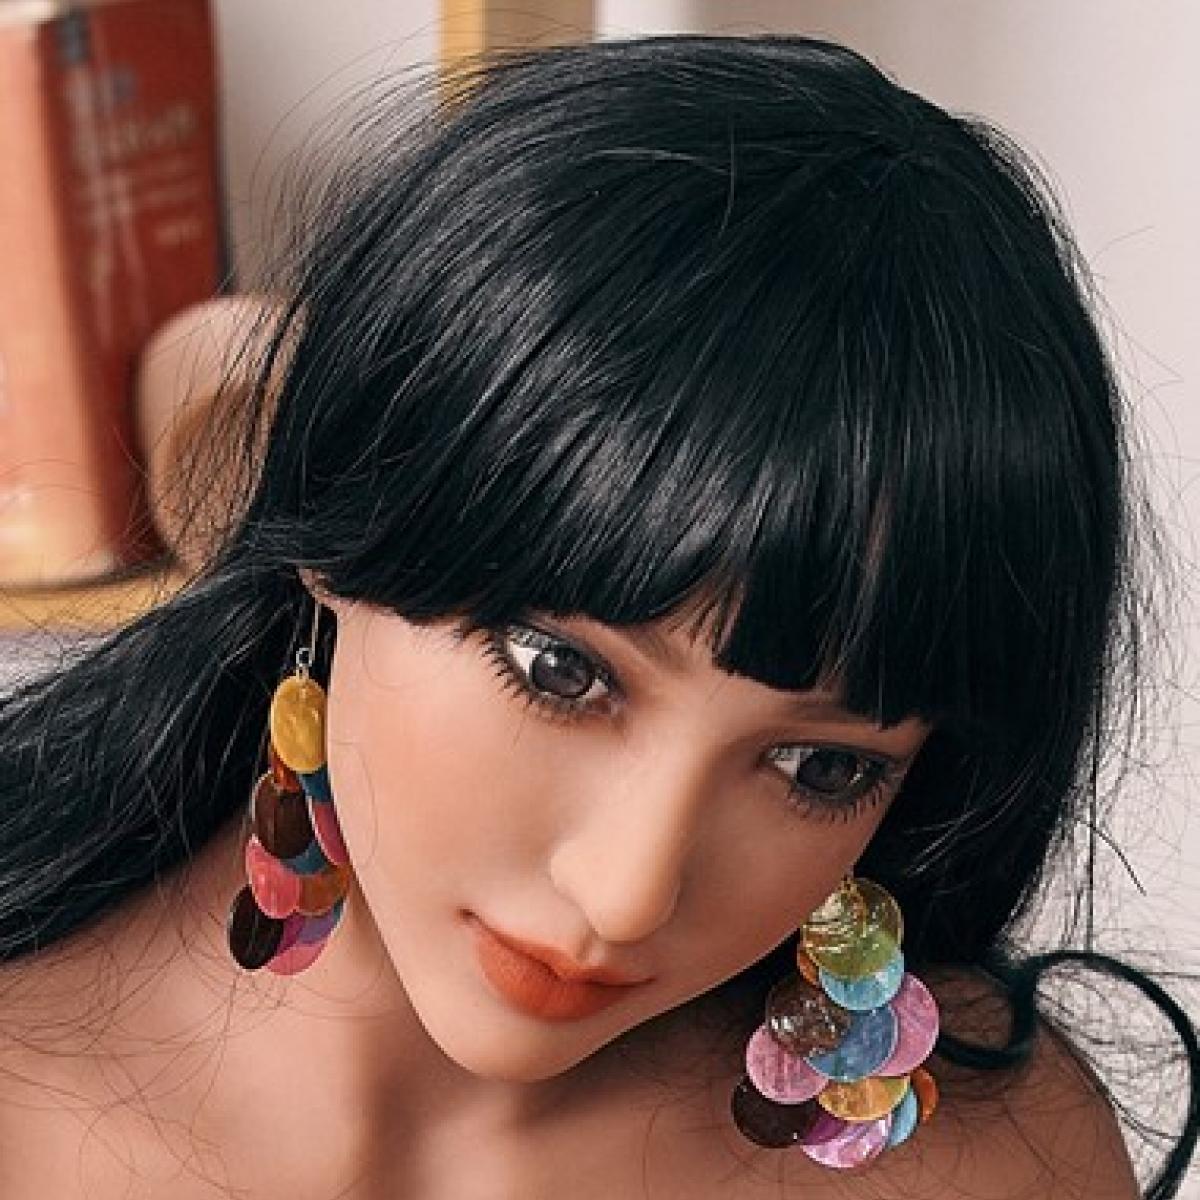 Neodoll Racy - Mika - Sex Doll Head - M16 Compatible - Brown